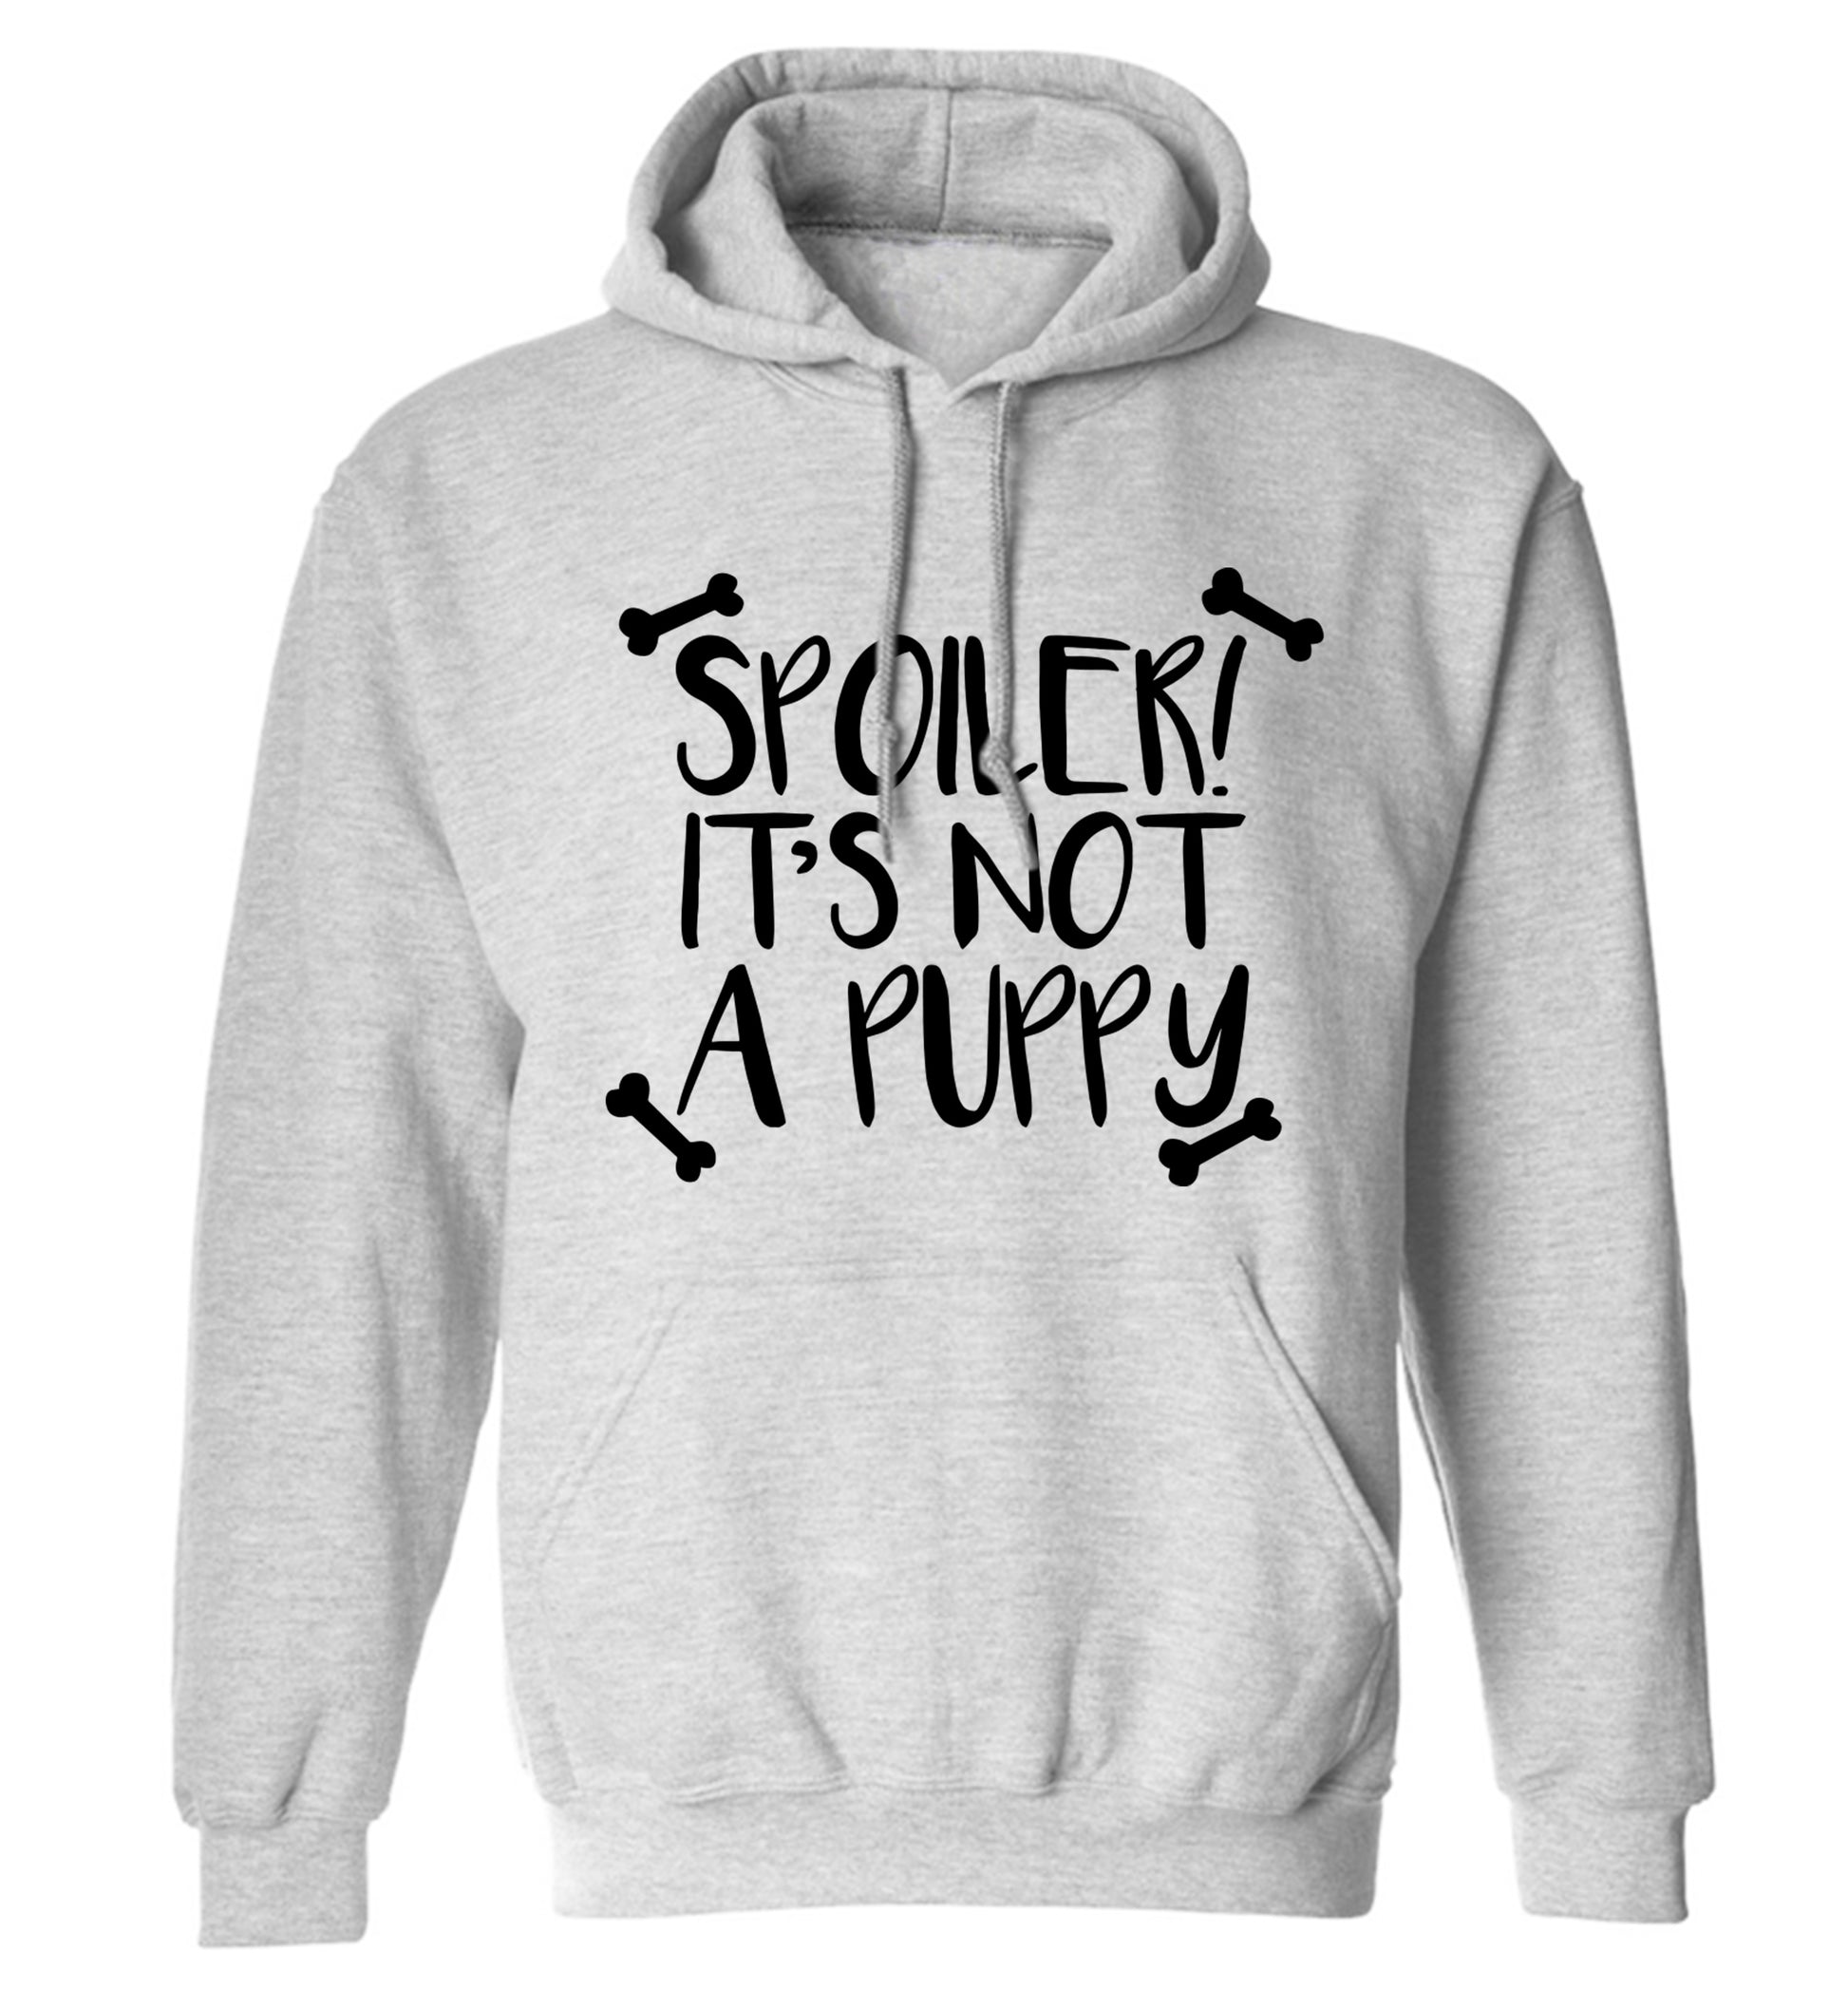 Spoiler it's not a puppy adults unisex grey hoodie 2XL